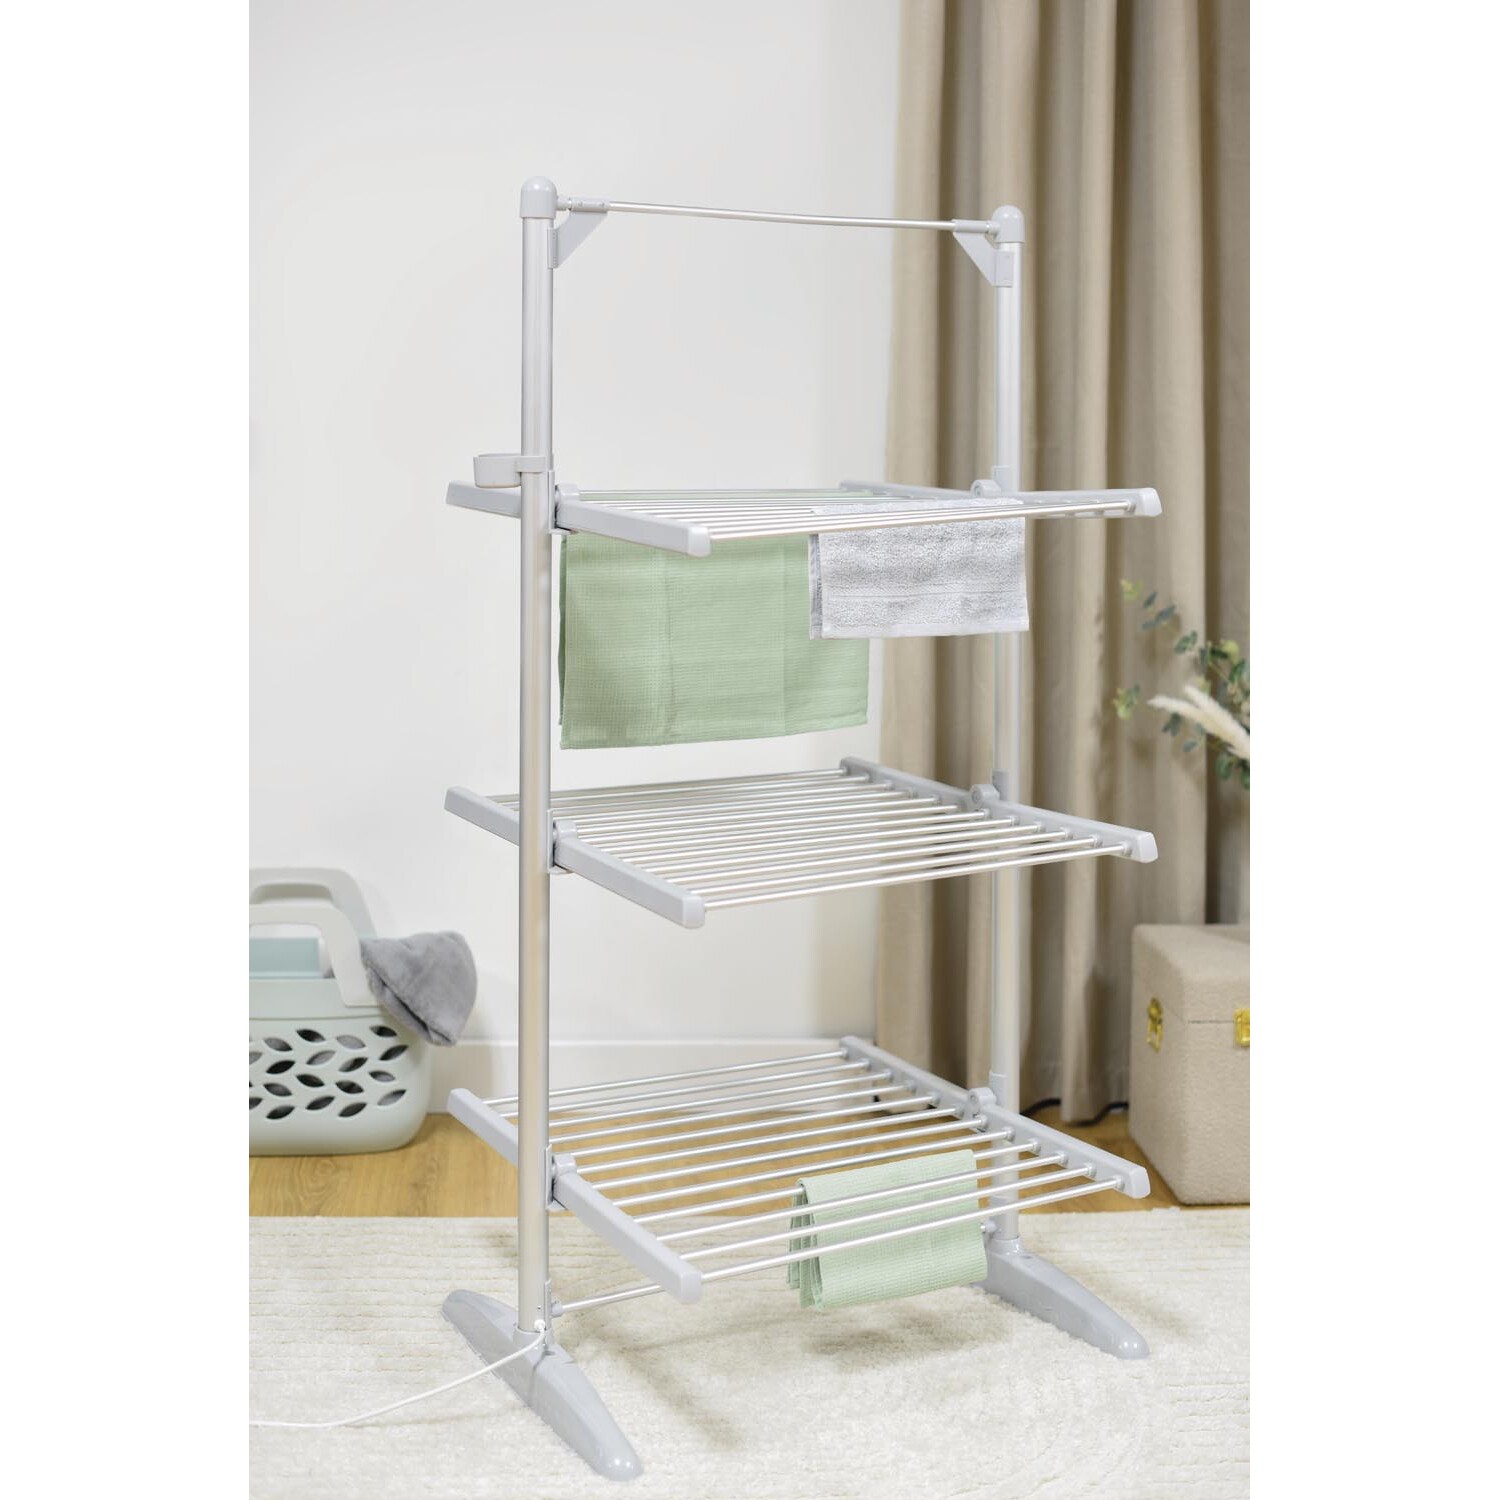 3 Tier Tower Heated Airer Image 2